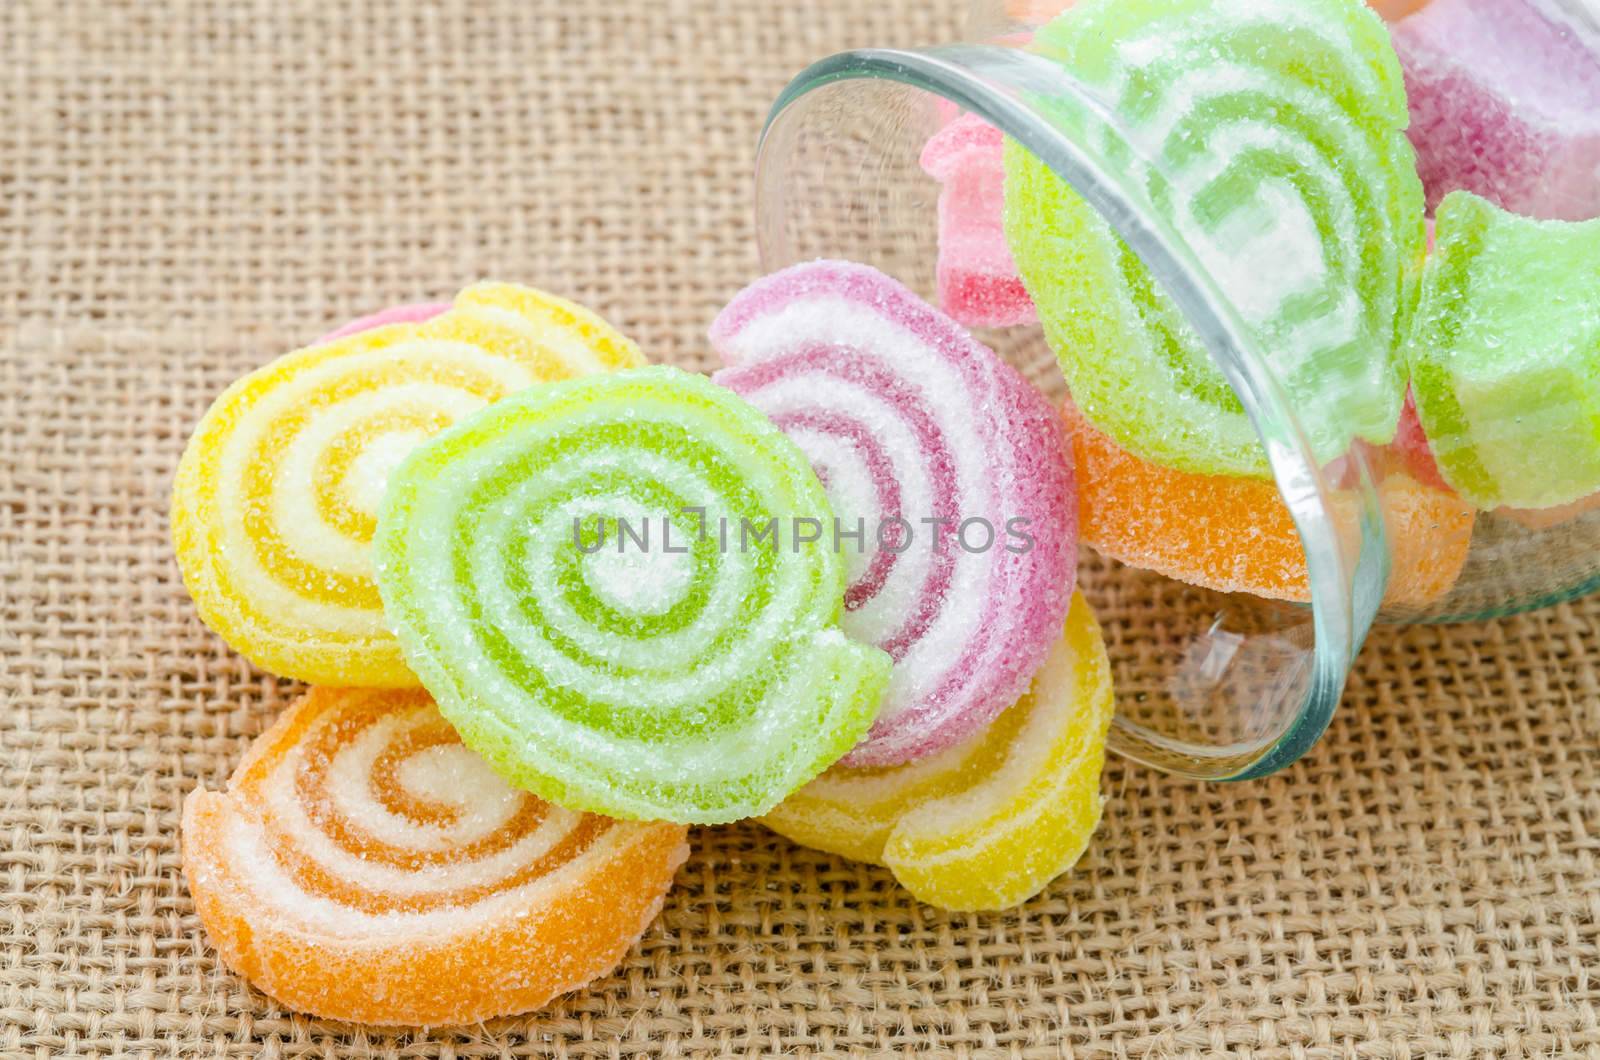 Sweet sugar candies in glass bottle on sack background.